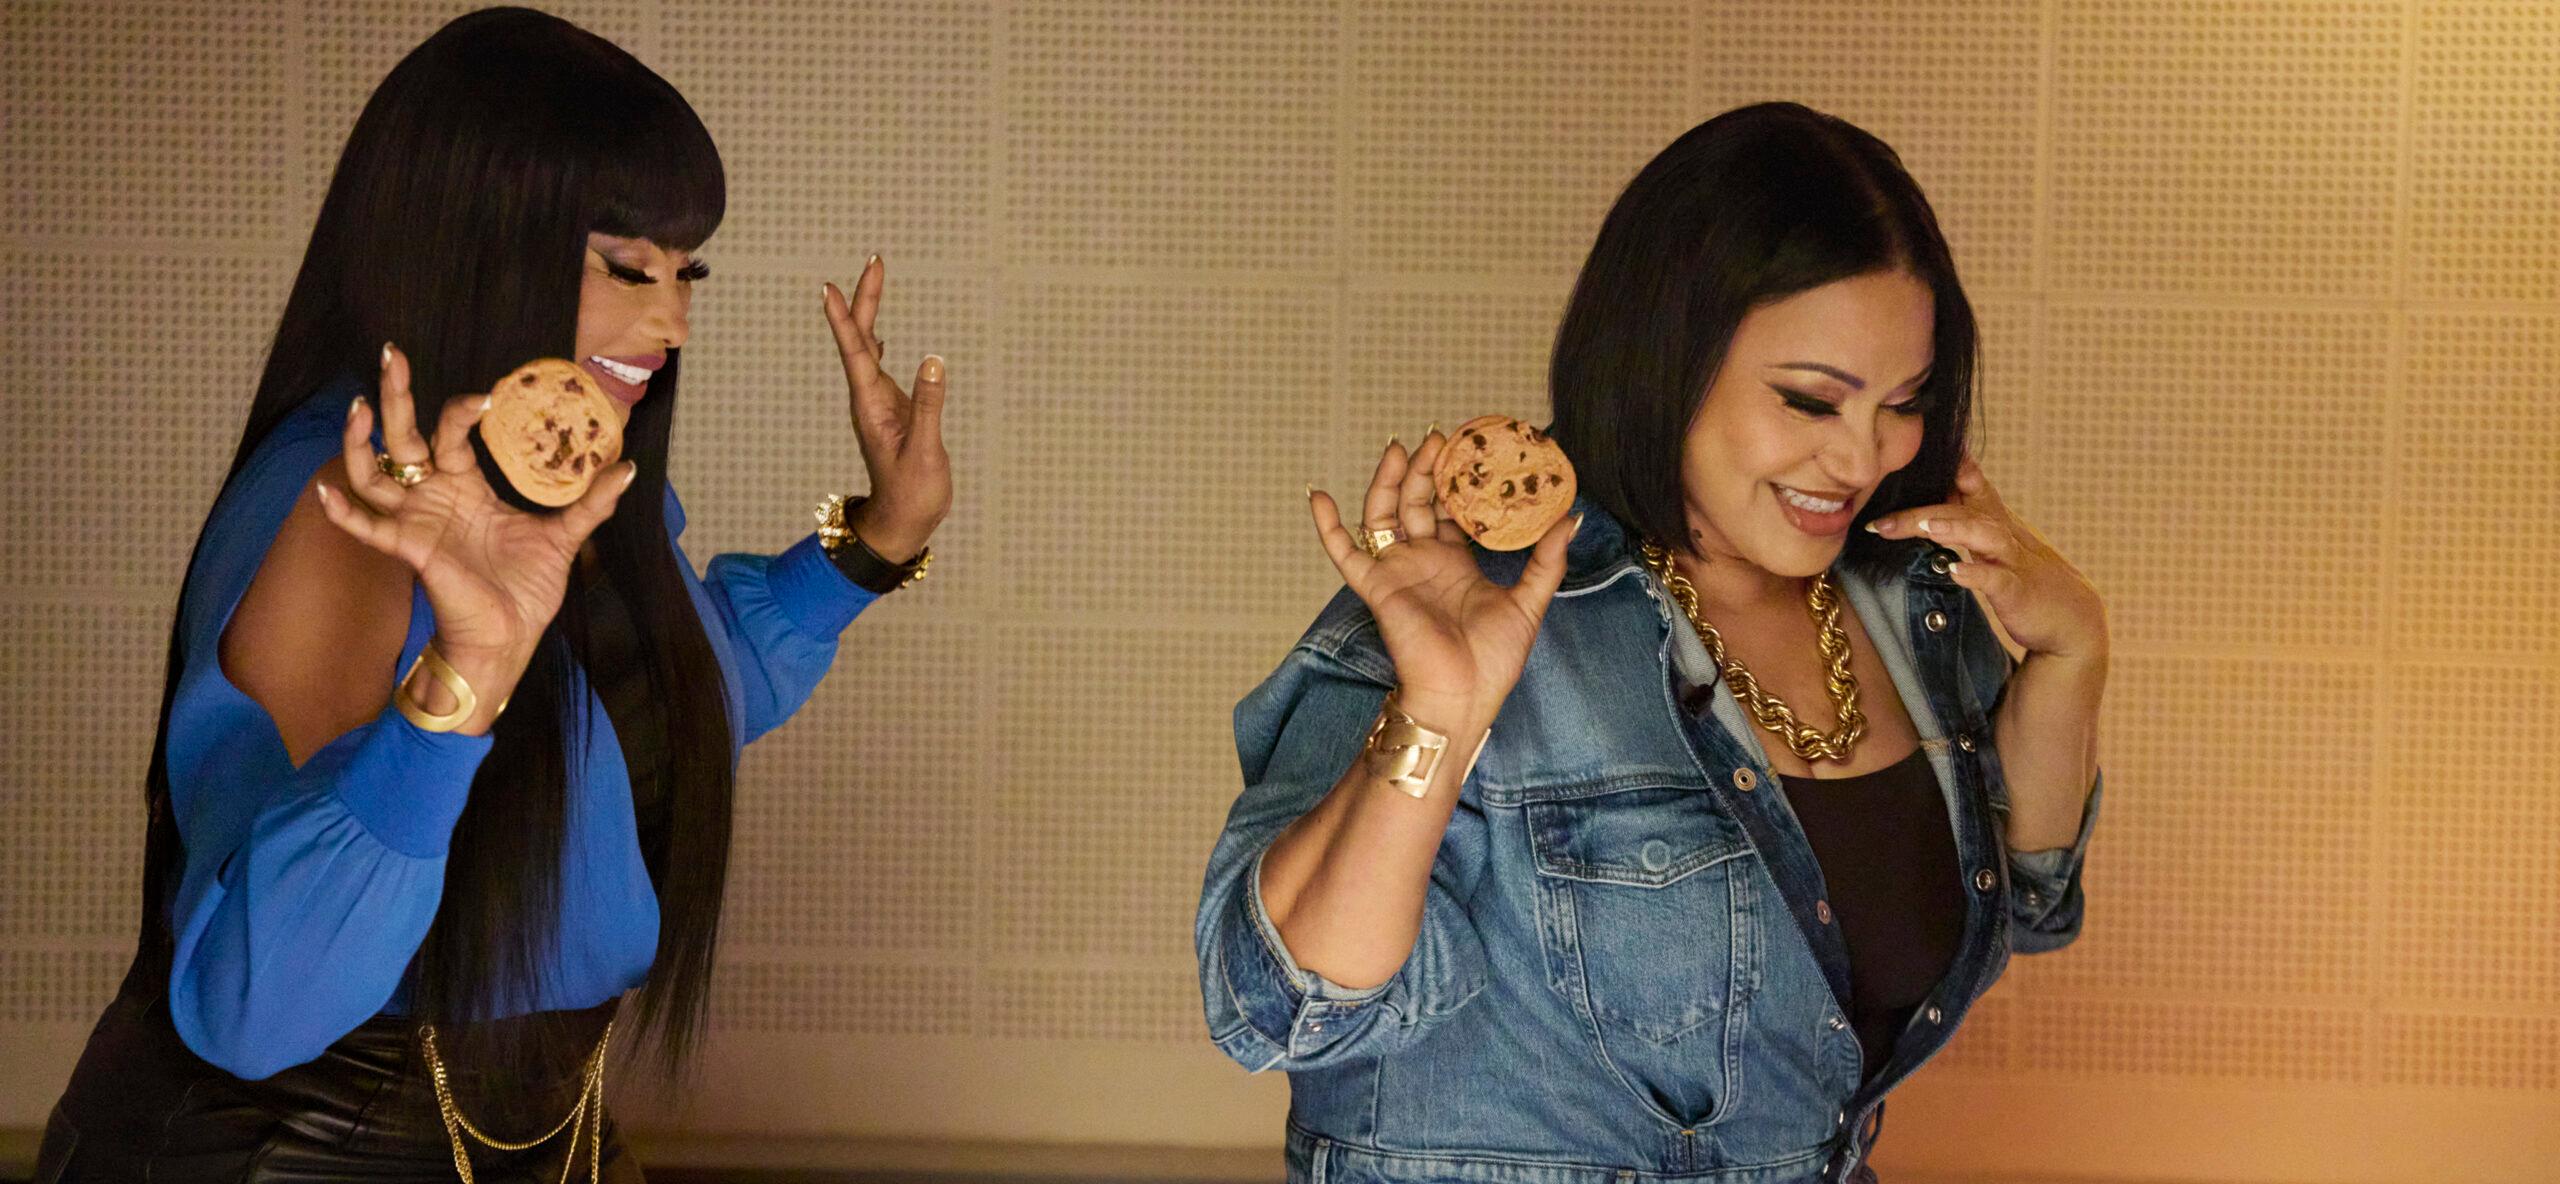 Salt-N-Pepa Want To Know ‘Who Stole The Cookie From The Cookie Jar’